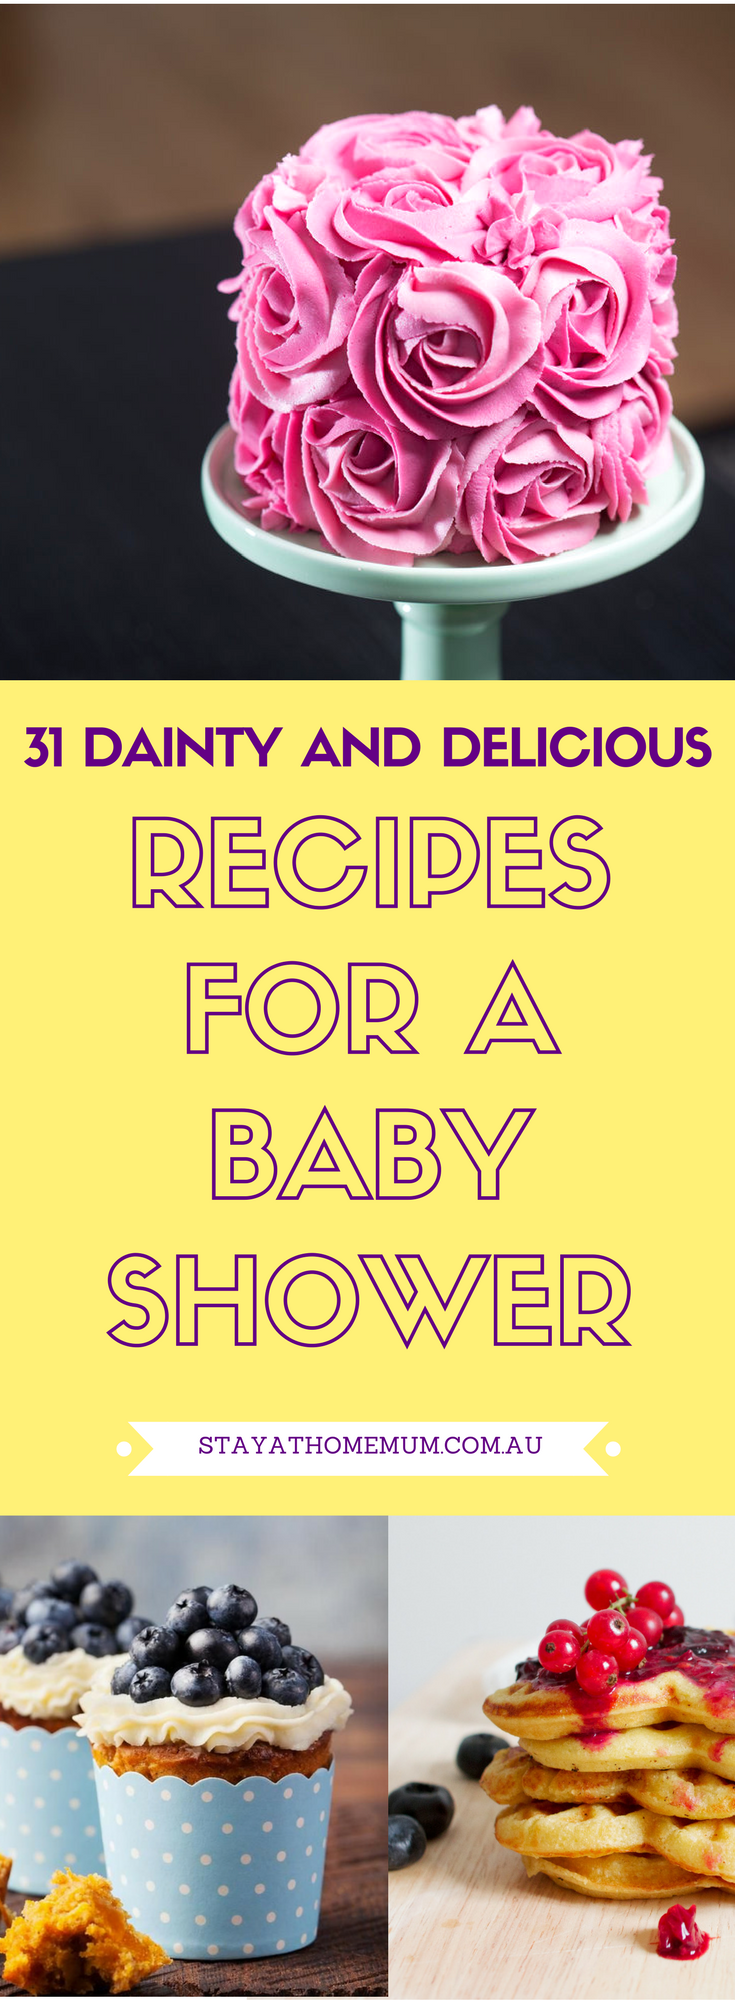 31 Dainty and Delicious Recipes for a Baby Shower | Stay At Home Mum